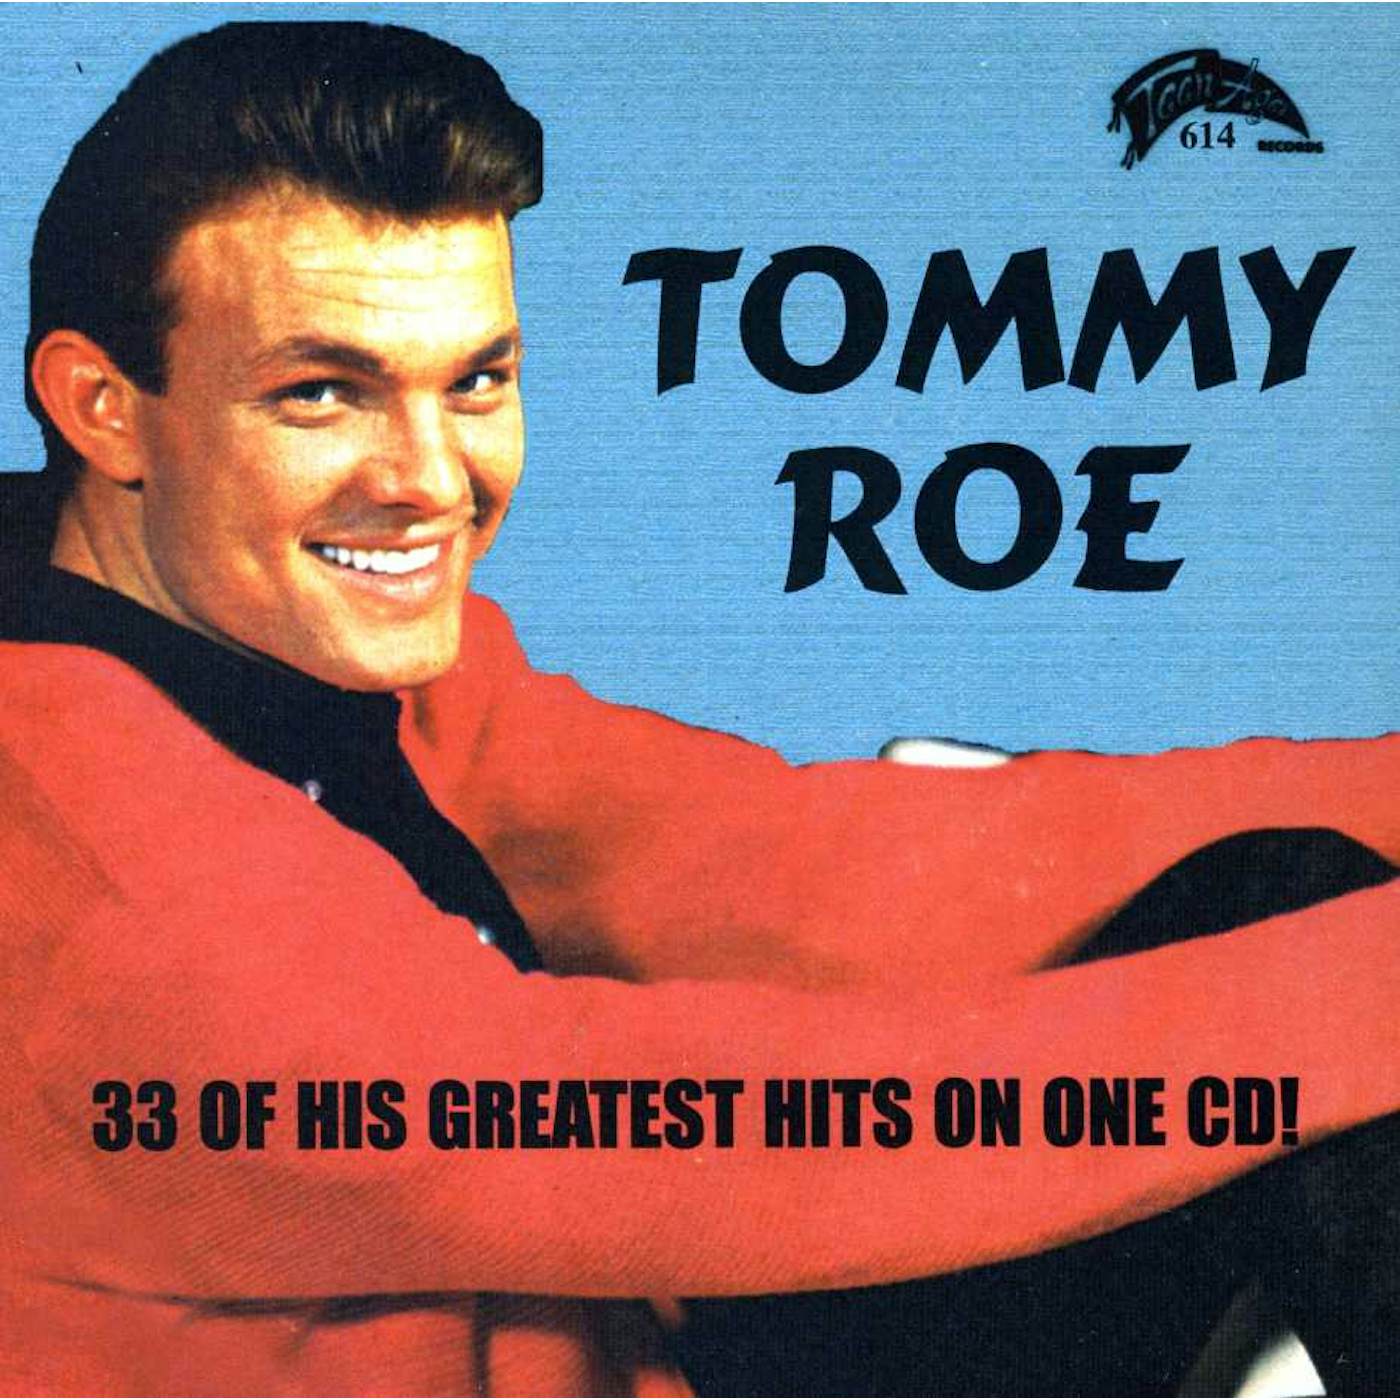 Tommy Roe 33 GREATEST HITS CD